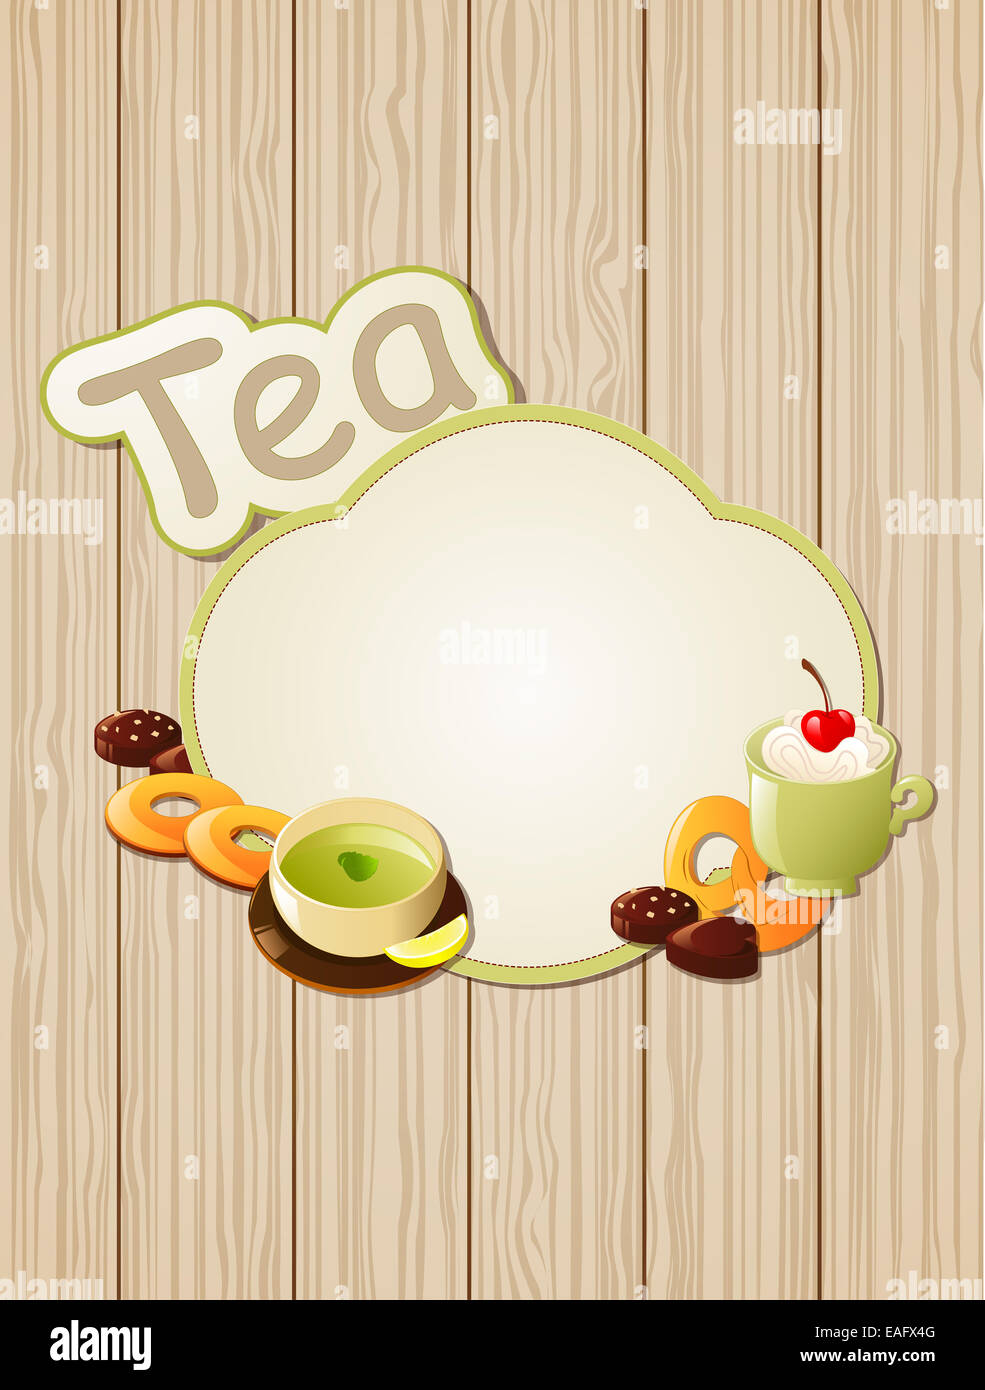 Background with tea label and cookies Stock Photo